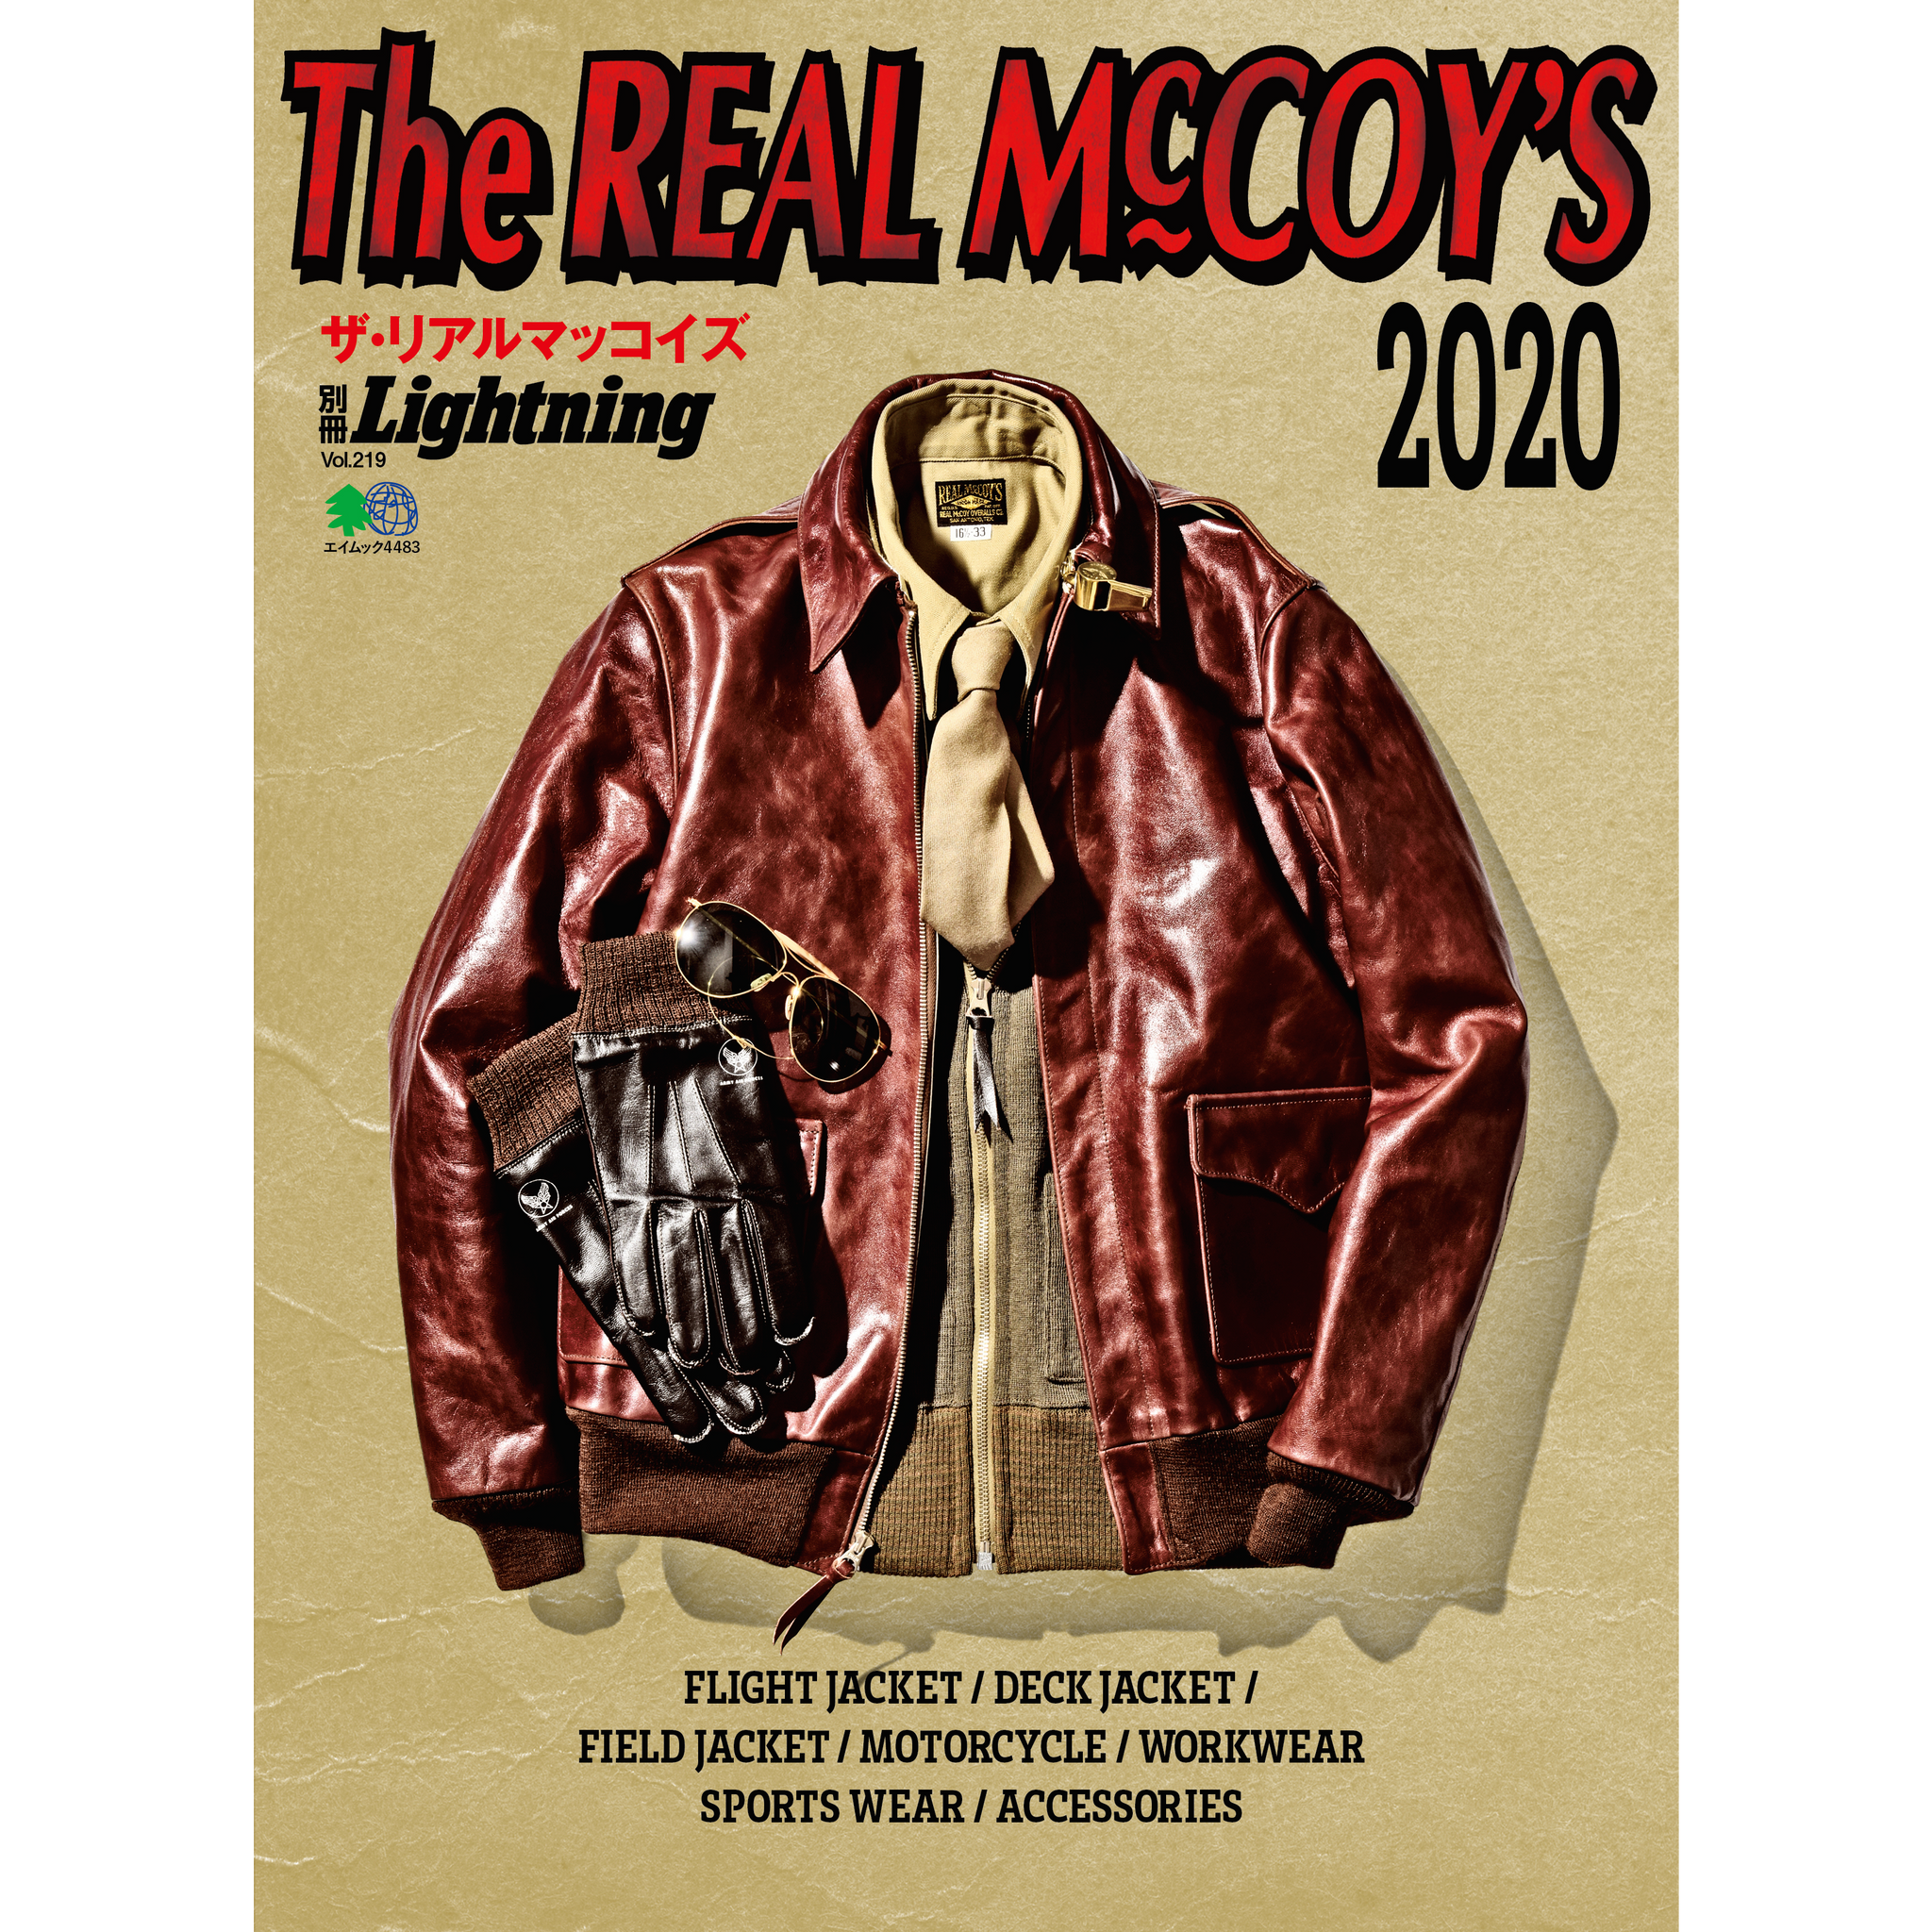 THE REAL McCOY'S BOOK 2020